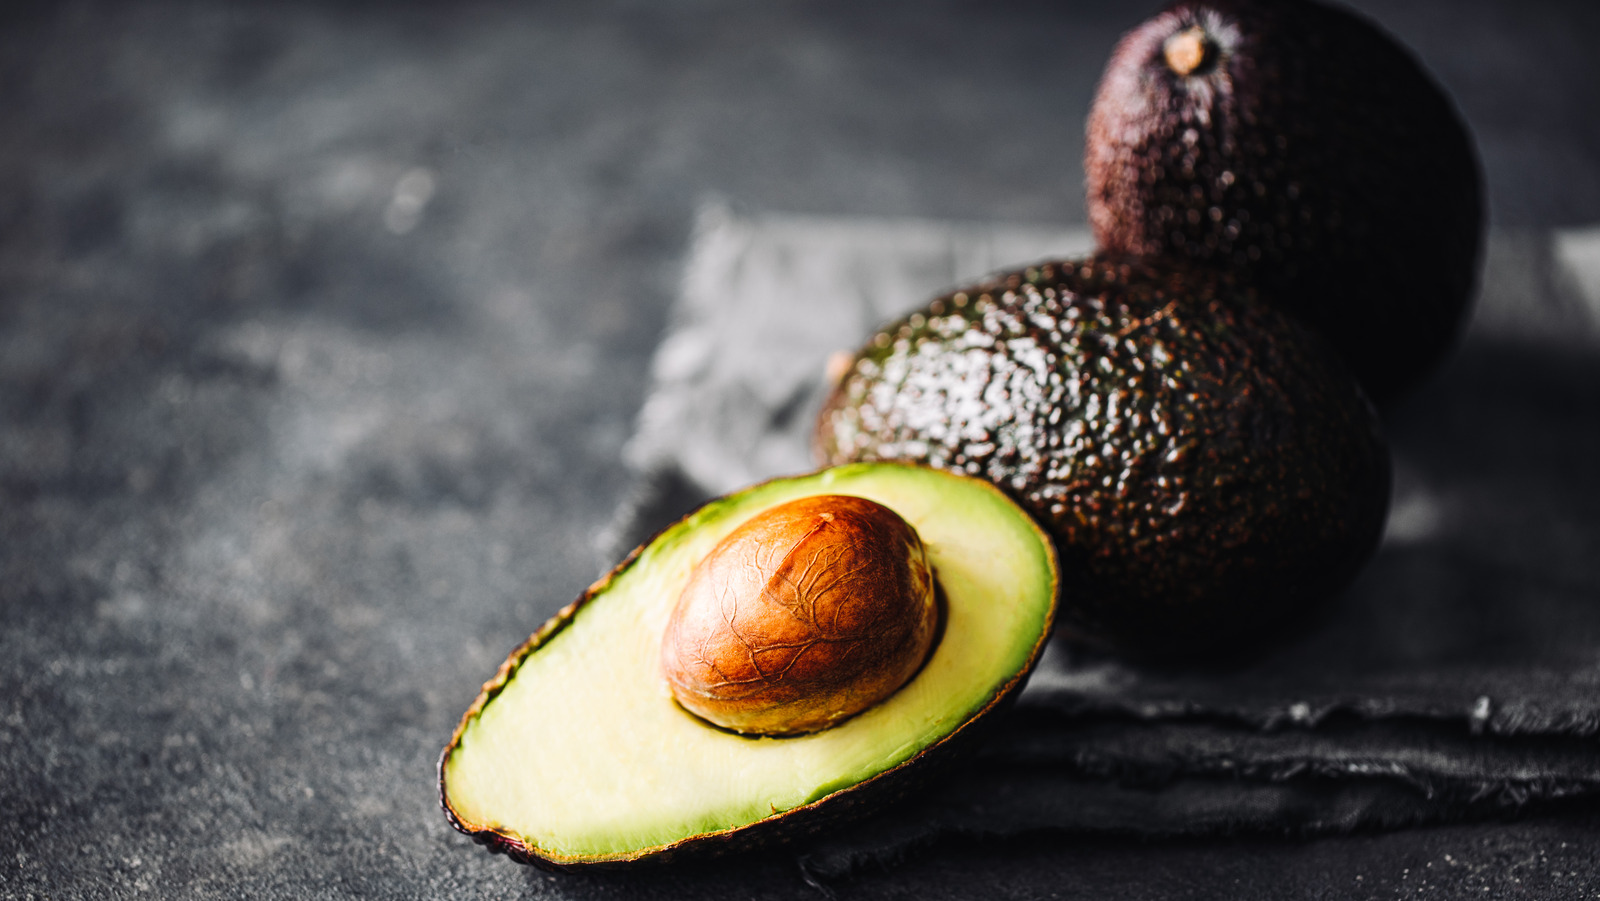 https://www.tastingtable.com/img/gallery/the-flour-hack-to-quickly-ripen-an-avocado/l-intro-1698267272.jpg